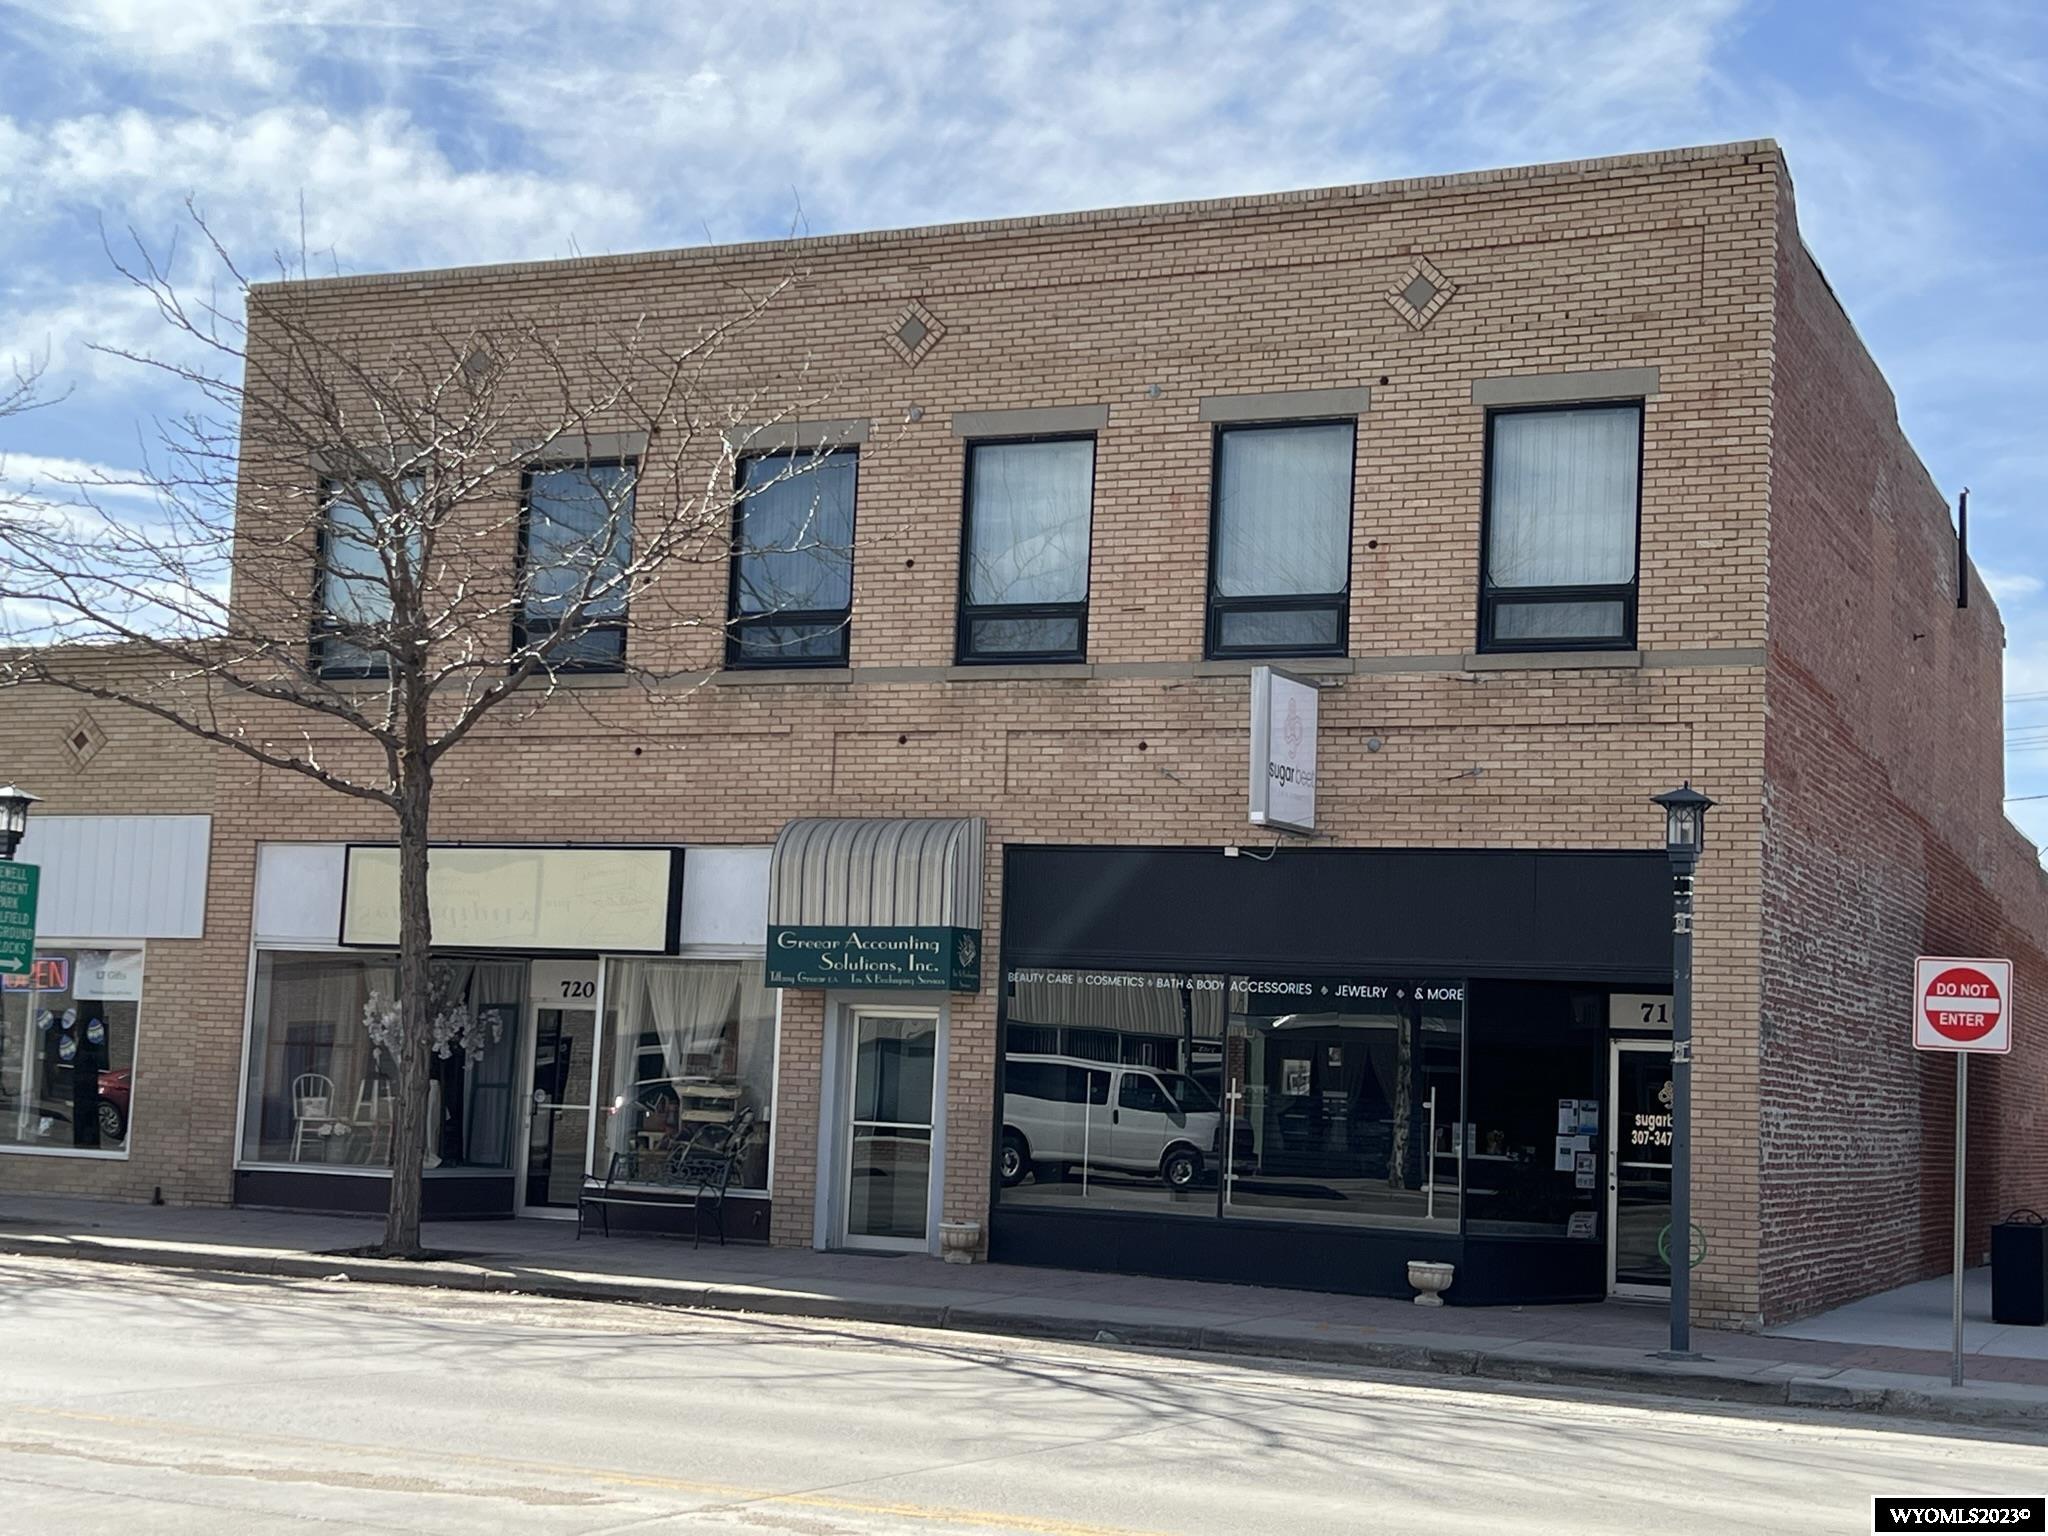 Don't miss your chance to own one of Worland's original downtown buildings!  This one has it all - so many possibilities!  It is a large building and is separated into three "units", two on the main level and one upstairs.  The east main level unit consists of retail space in the front, a restroom, and additional large room. The west main level unit is currently a salon with an office, 3 rooms currently used for aesthetic services/nails, 3 rooms currently used for tanning, and kitchen/prep area.  There is a separate restroom near the tanning rooms, a "break room", an additional restroom in the back, a laundry room, and a storage room.  The rear space of the building on the main level is open and has a separate walk-through door.  The upstairs space consists of multiple large offices and conference rooms, a  kitchen/break room, and separate restrooms.  It is conveniently accessed through its own front door where customers can take the stairs or utilize the fully operational elevator (certifications will need to be brought current).  Heat on main level is provided with a combination of radiant gas and baseboard electric. .  Roof HVAC units provide heat and A/C to upstairs, and A/C to retail spaces on main level.